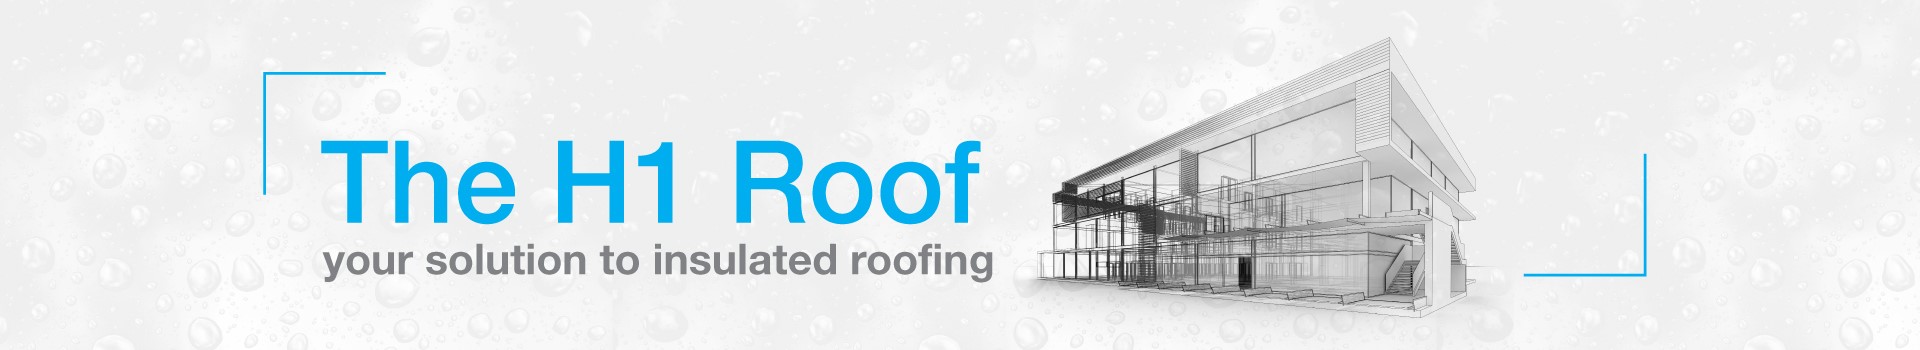 The H1 Roof - your solution to insulated roofing